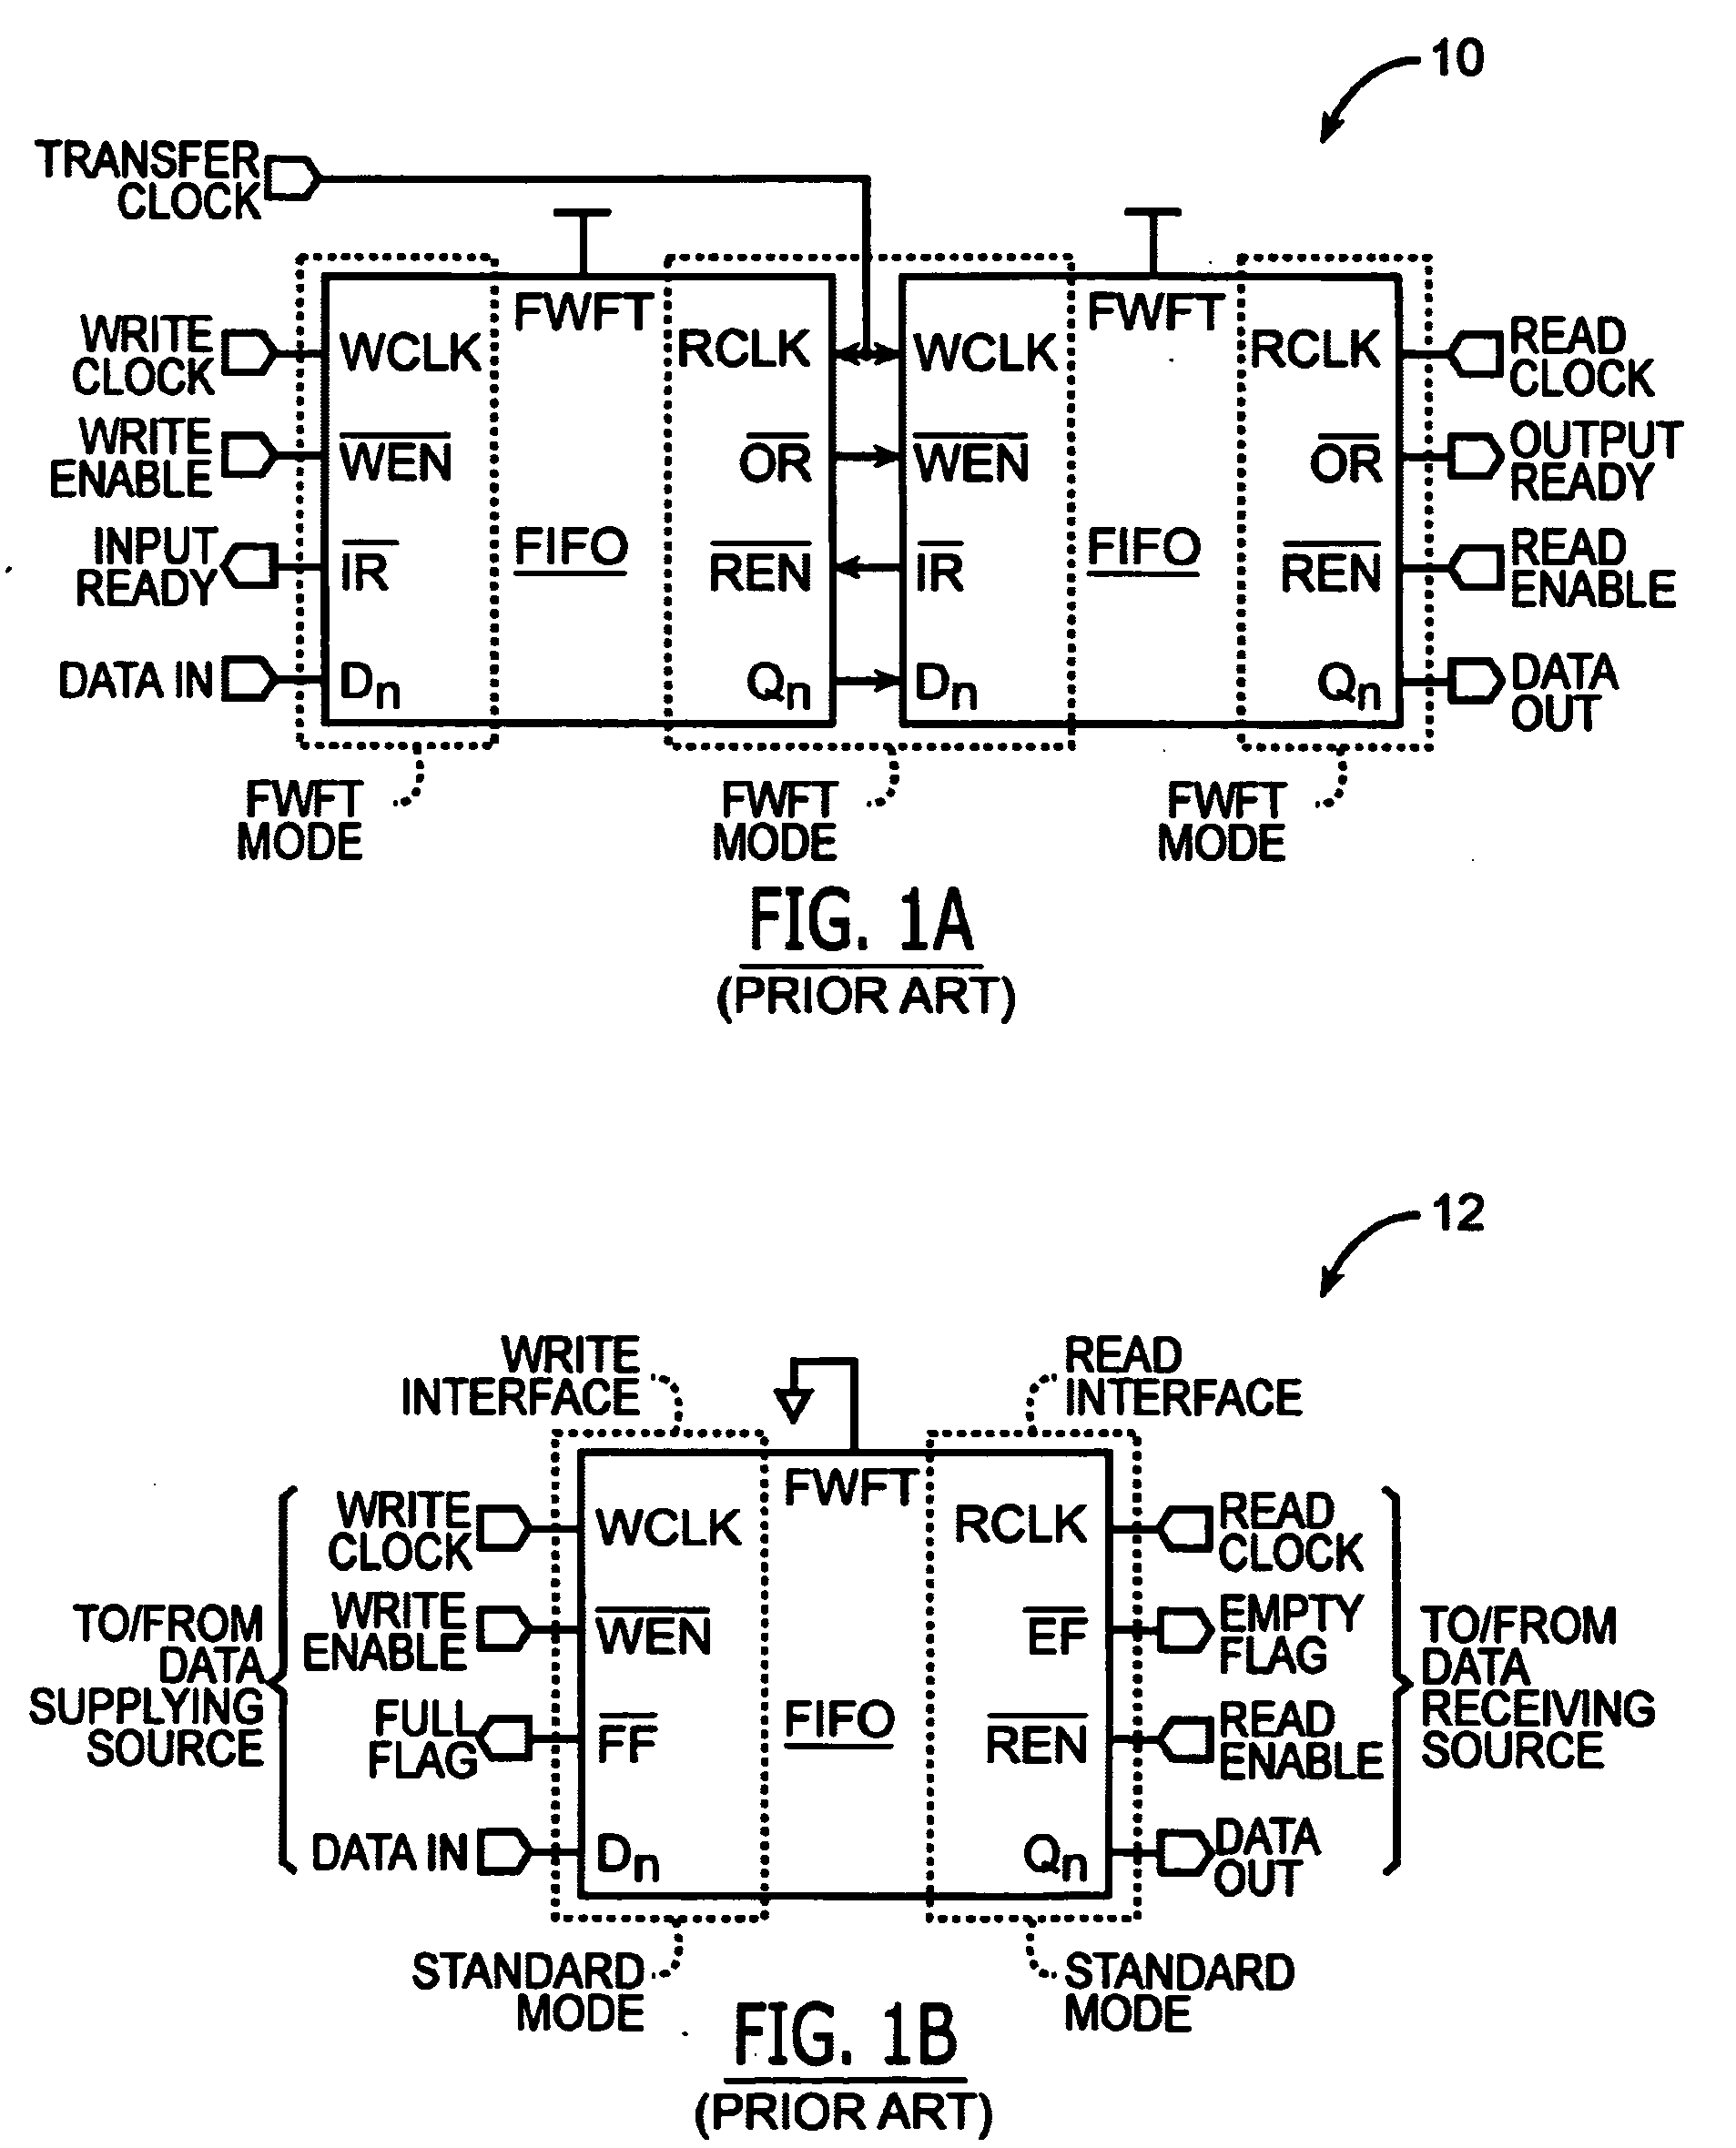 Sequential flow-control and FIFO memory devices that are depth expandable in standard mode operation